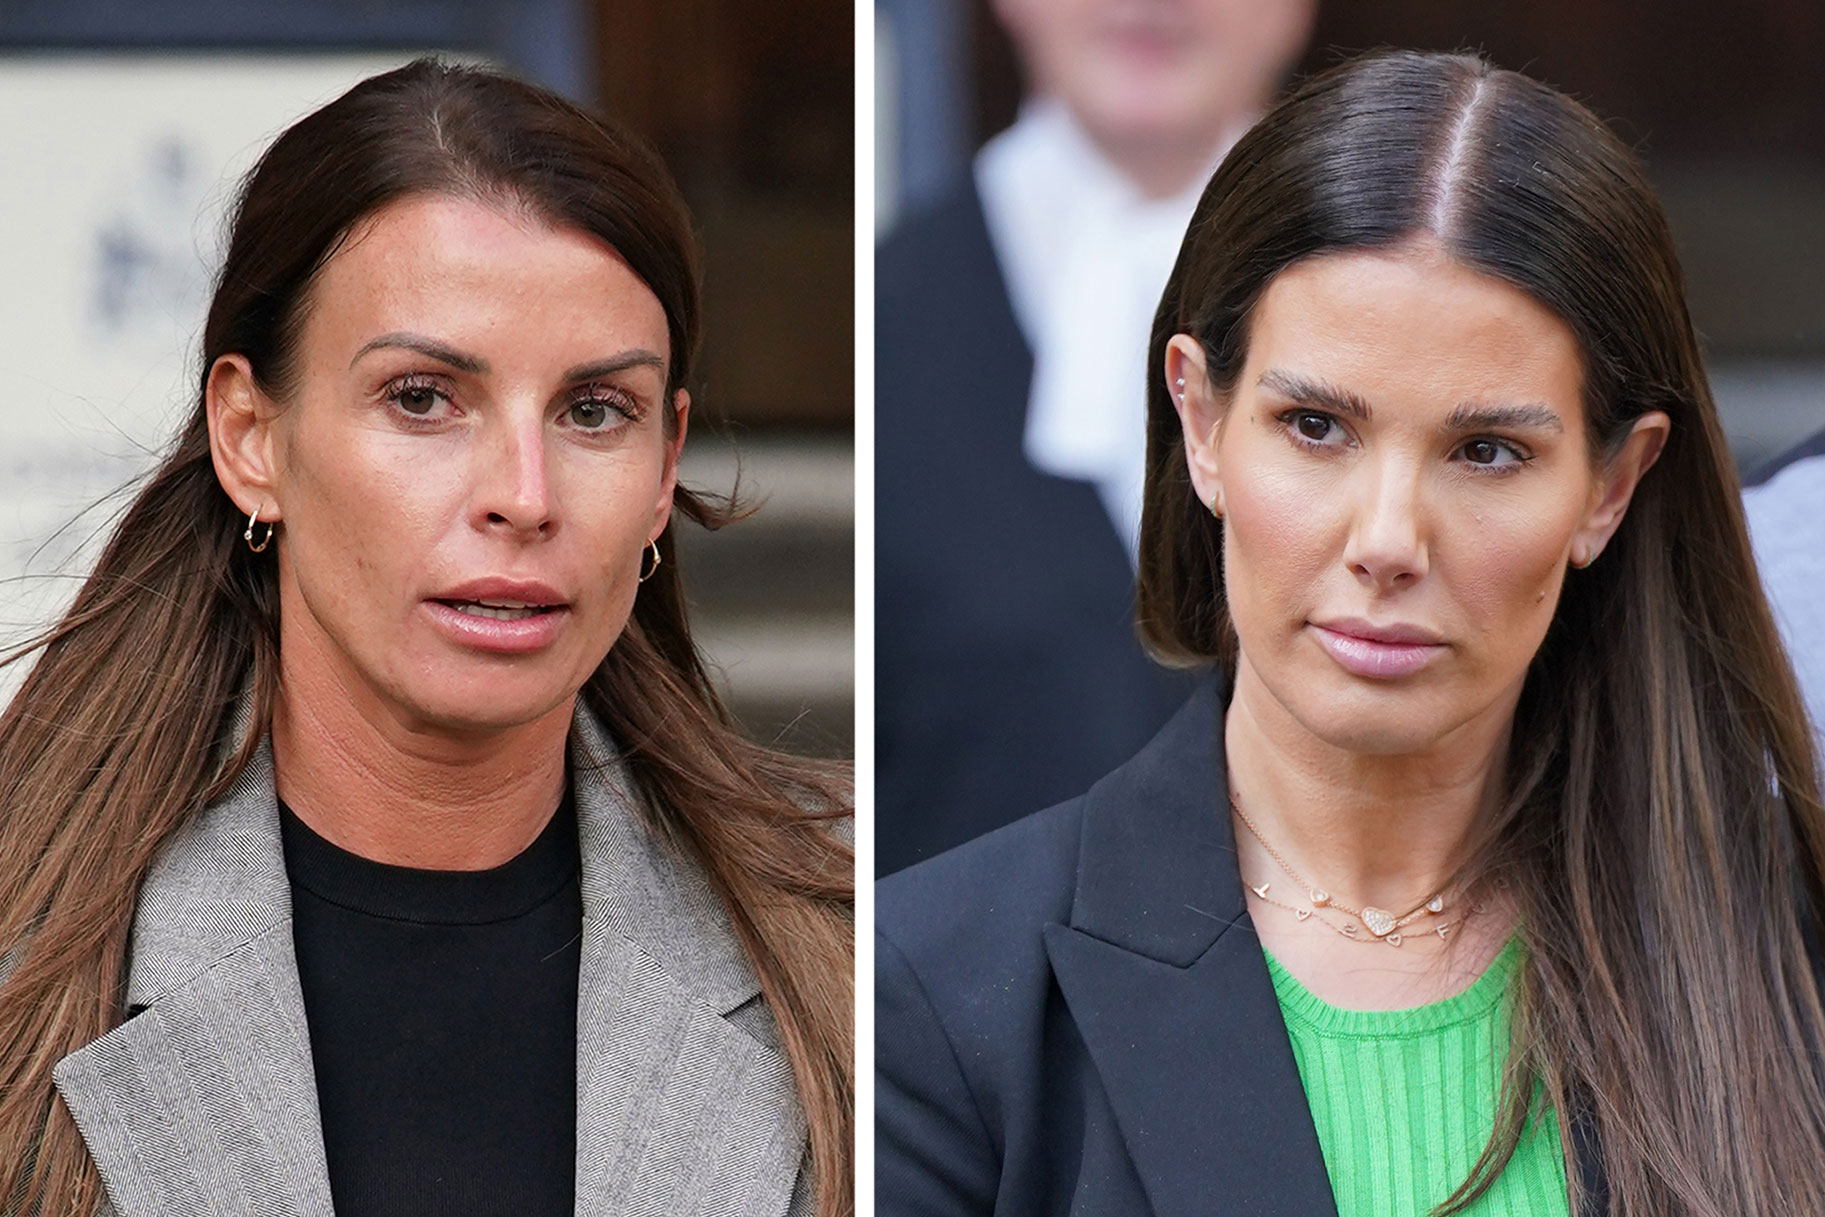 Undated file photos of Coleen Rooney (left) Rebekah Vardy who are due to find out who has won their High Court libel battle in the "Wagatha Christie" case